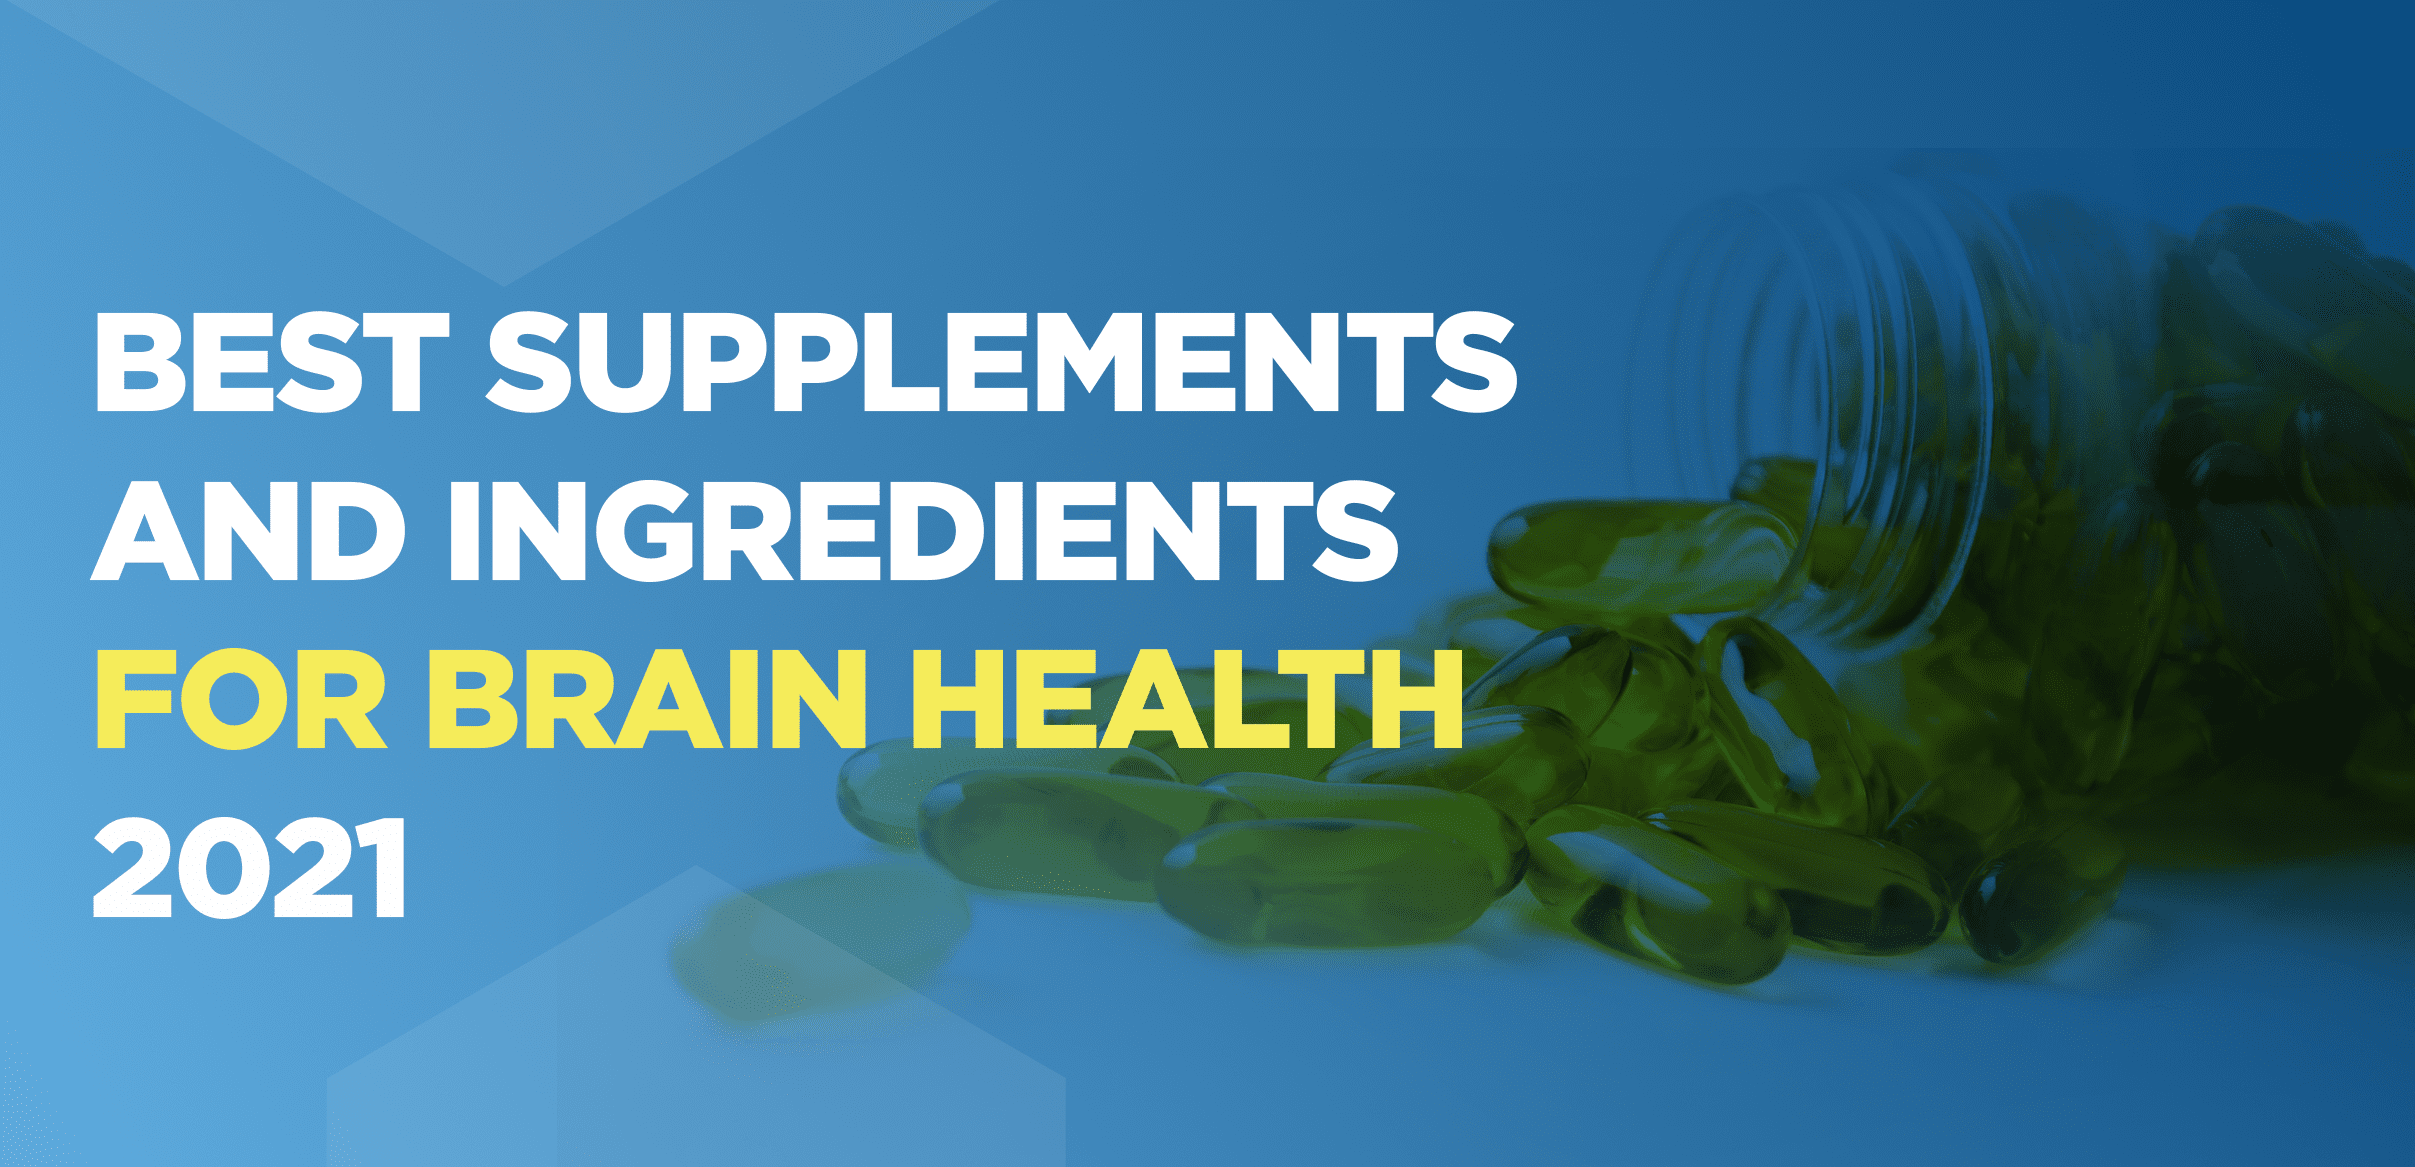 Best Supplements and Ingredients for Brain Health 2021